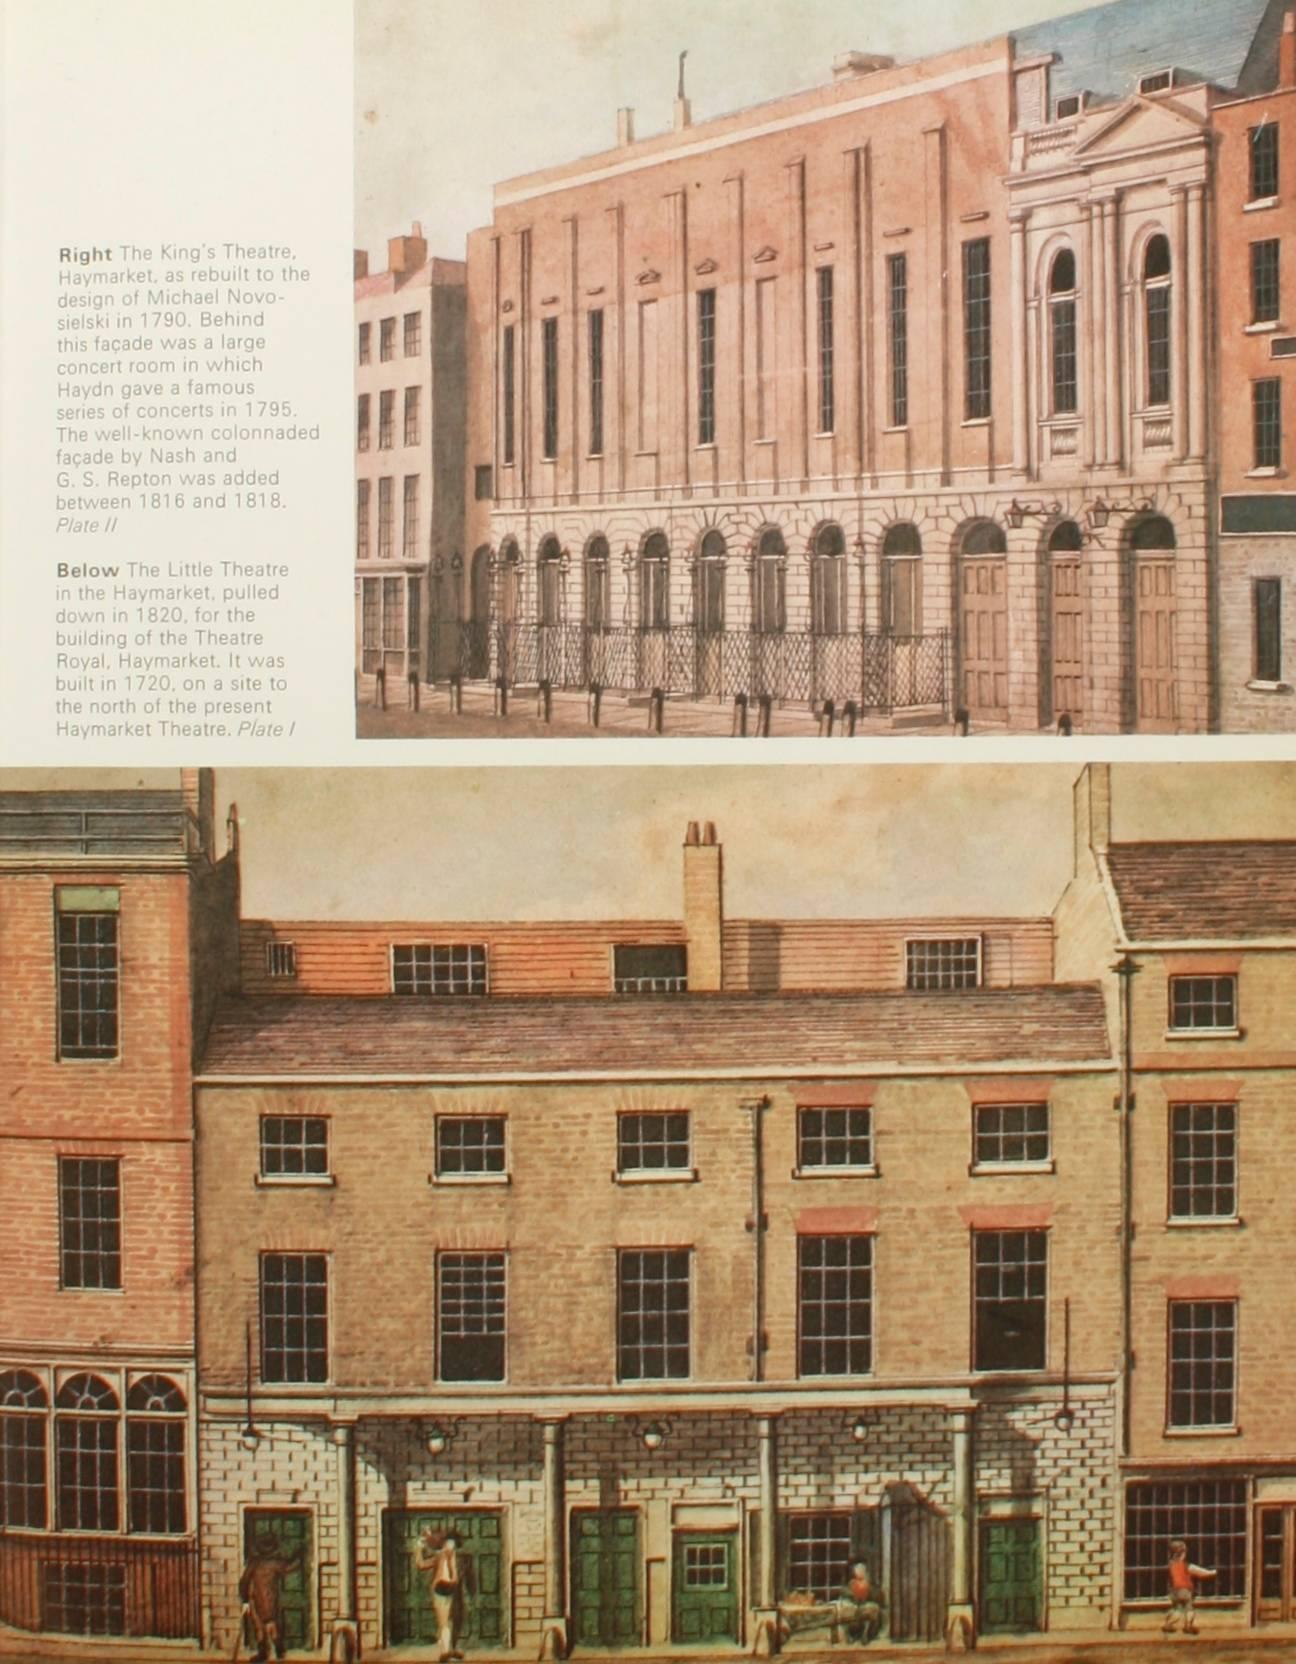 A History of Regent Street by Hermoine Hobhouse. London: Macdonald and Jane's Ltd, 1975. First Edition hardcover with dust jacket. 166 pp. A history of London's premier shopping street. Regent street was planned and executed by the Prince Regent's